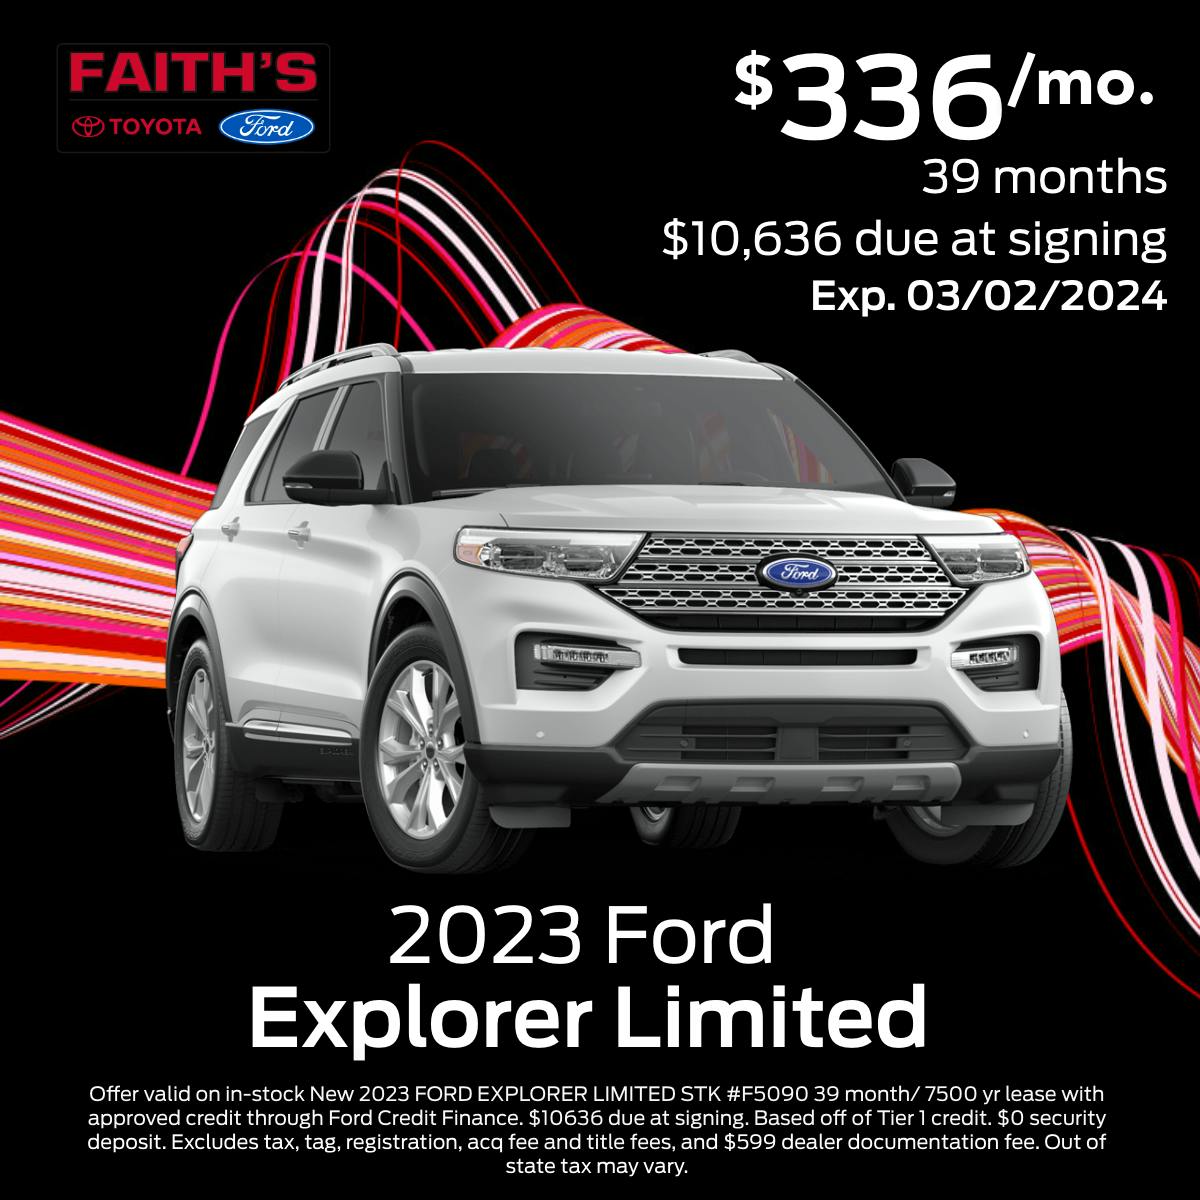 2023 Ford Explorer Limited Lease Offer | Faiths Ford